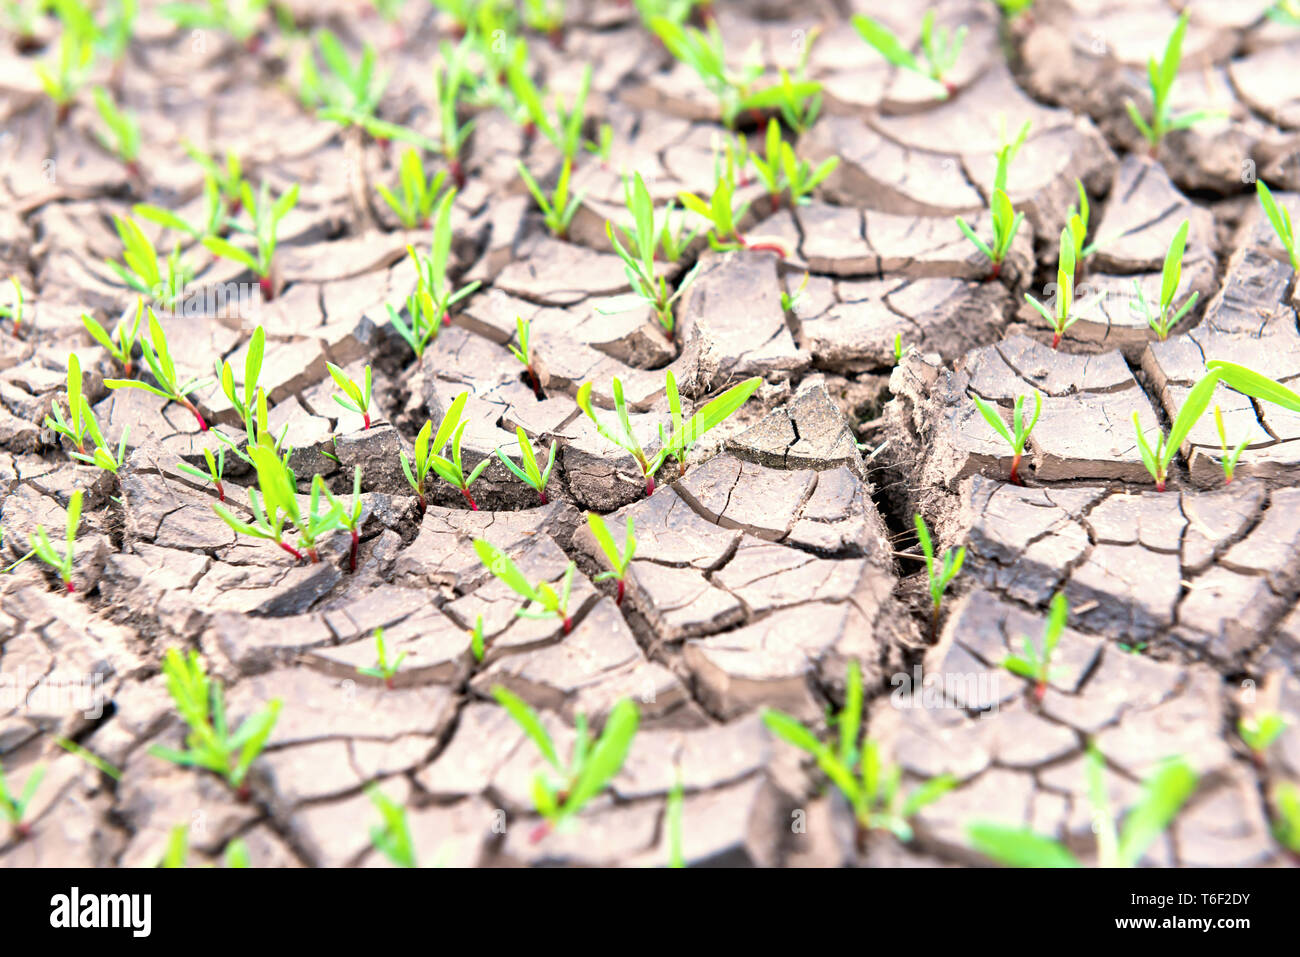 Dry land with green plants Stock Photo